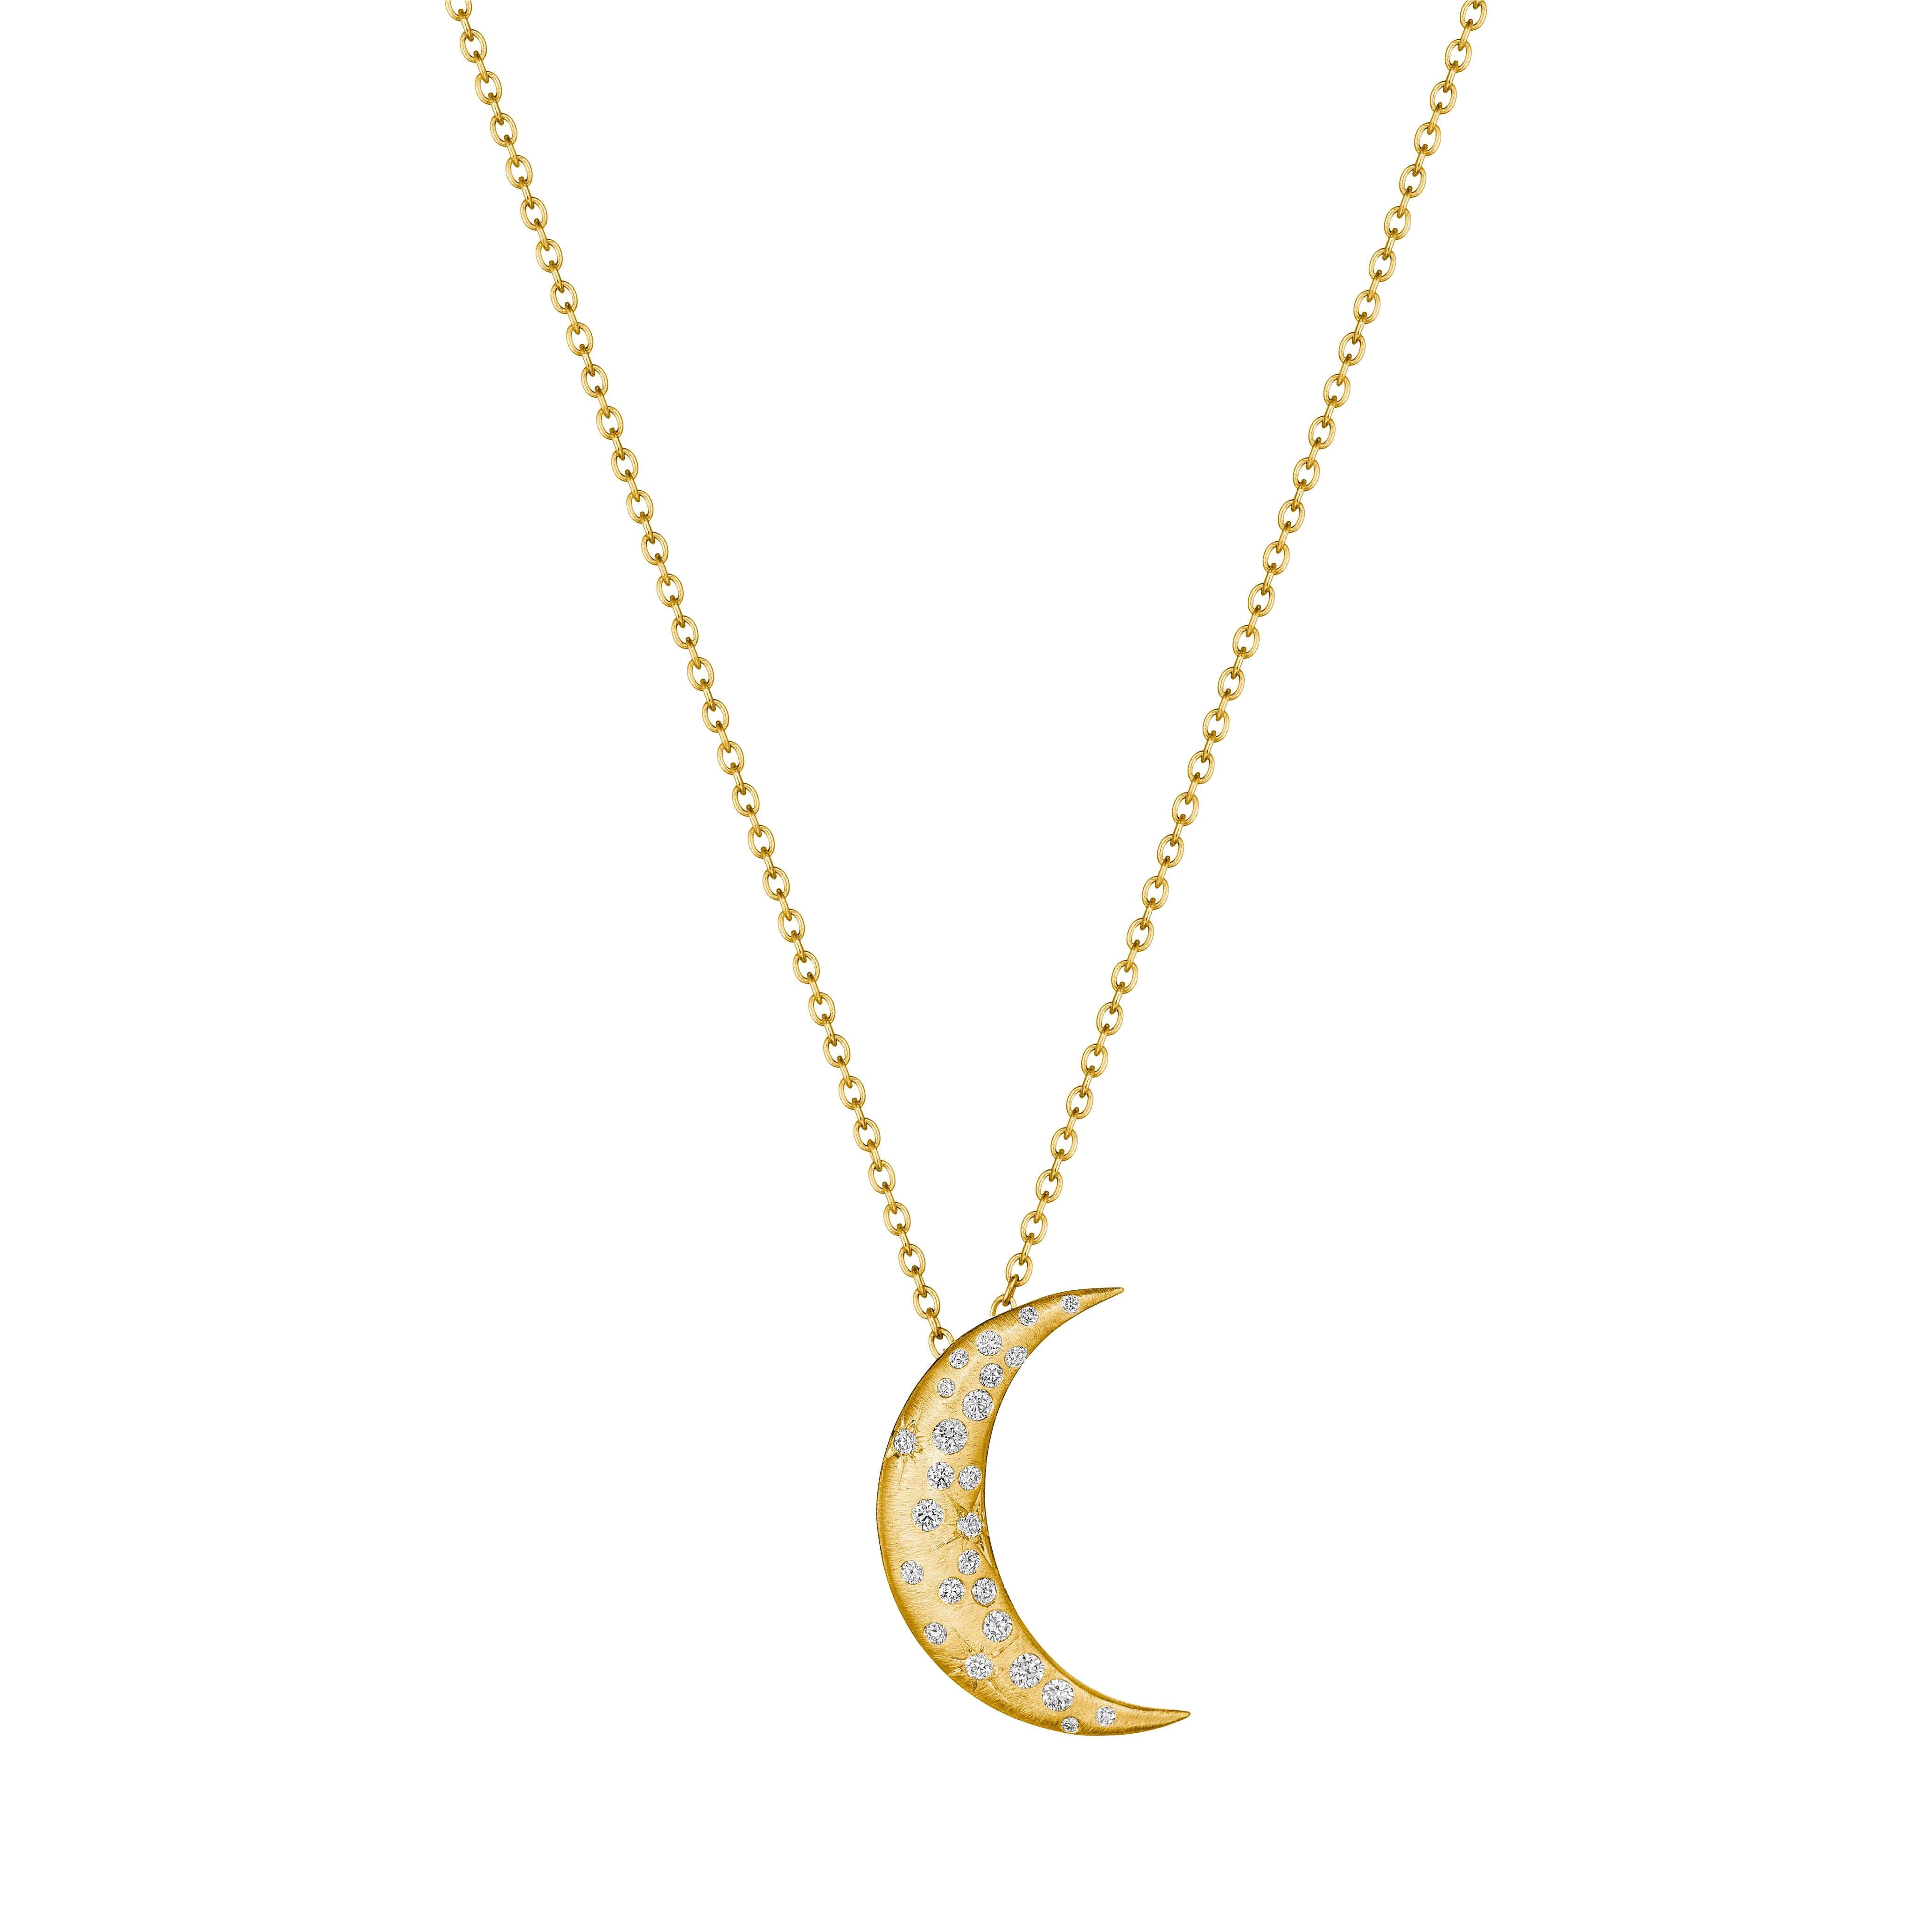 Small crescent moon necklace in 18kt solid gold